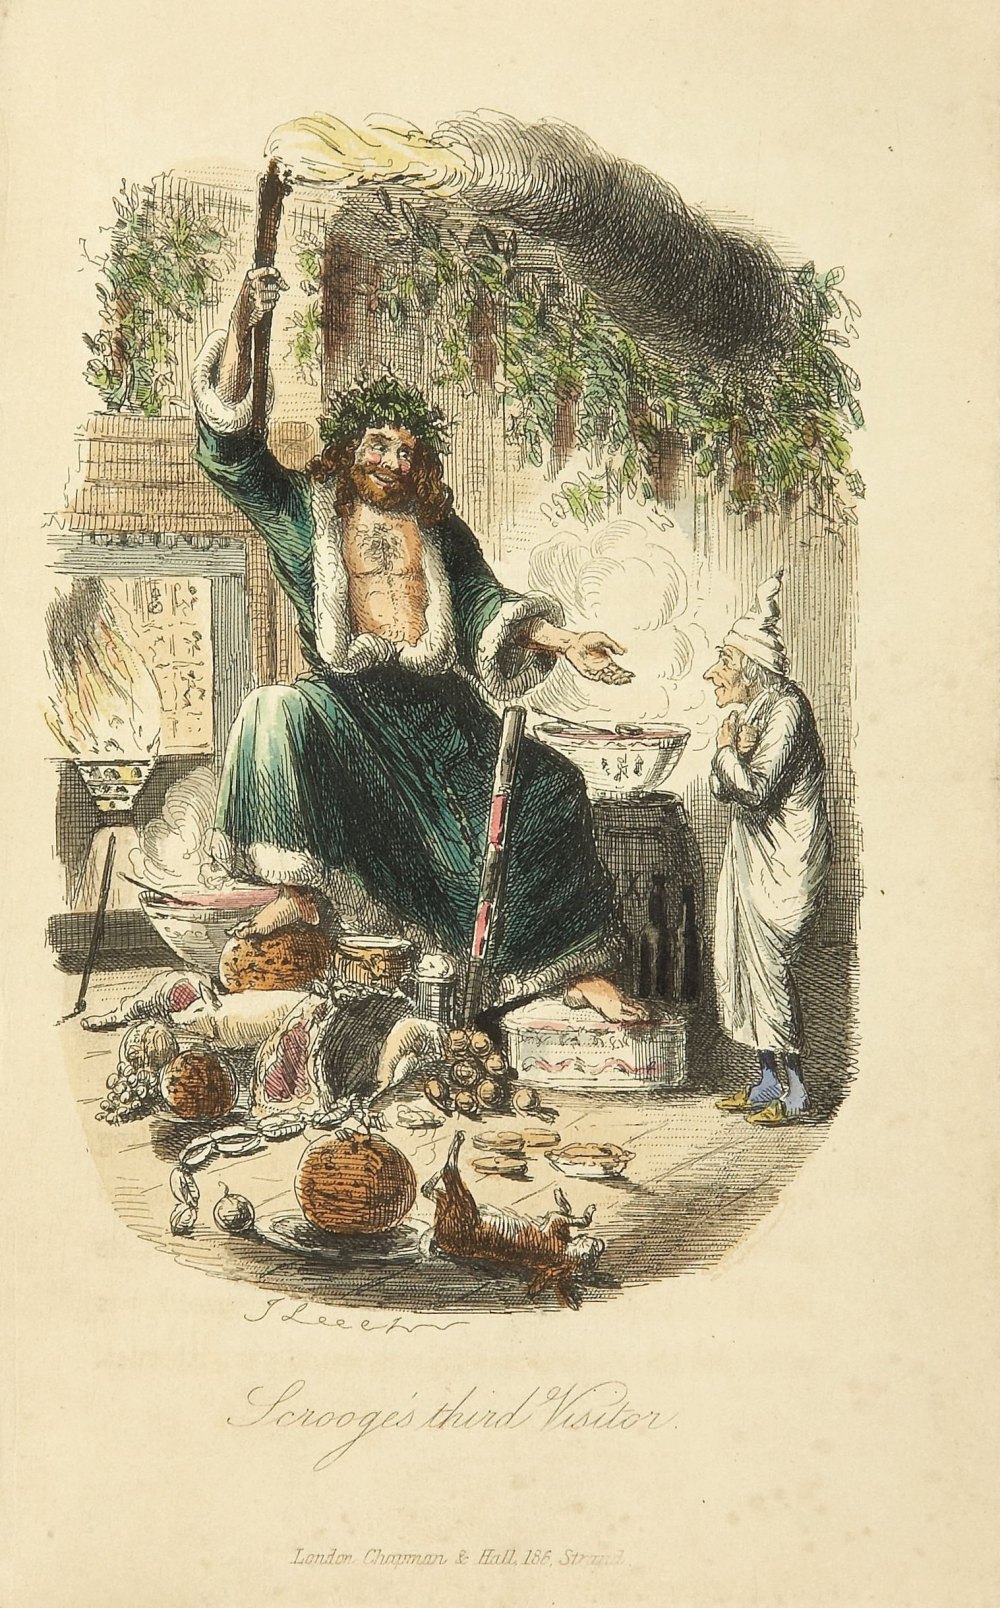 Scrooge and the Ghost of Christmas Present from A Christmas Carol by Charles Dickens